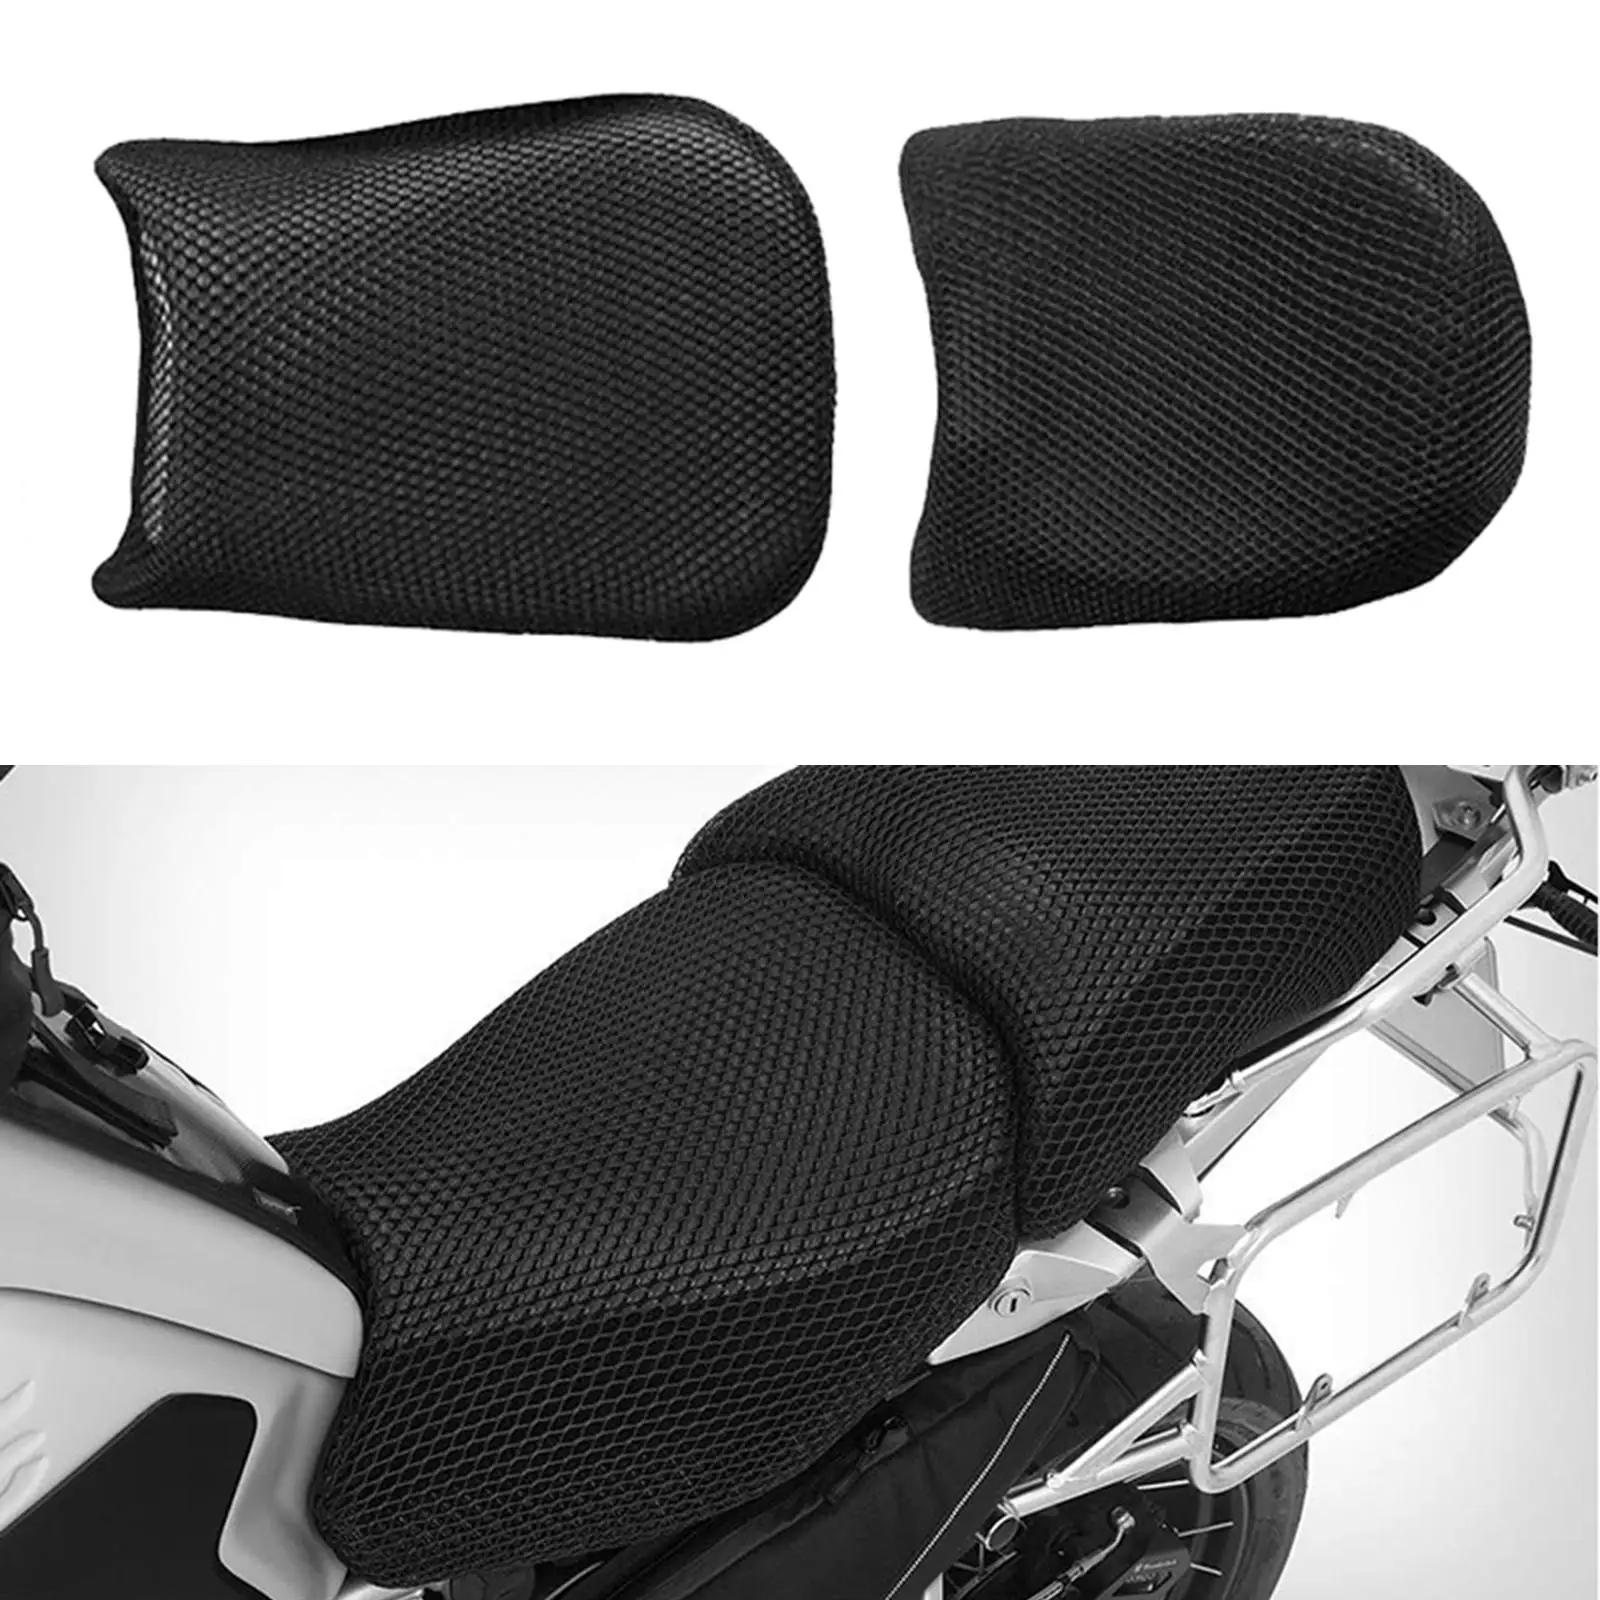 Motorbike Motorcycle Protecting 3D Comfort Saddle Seat Cushion Pad Cover